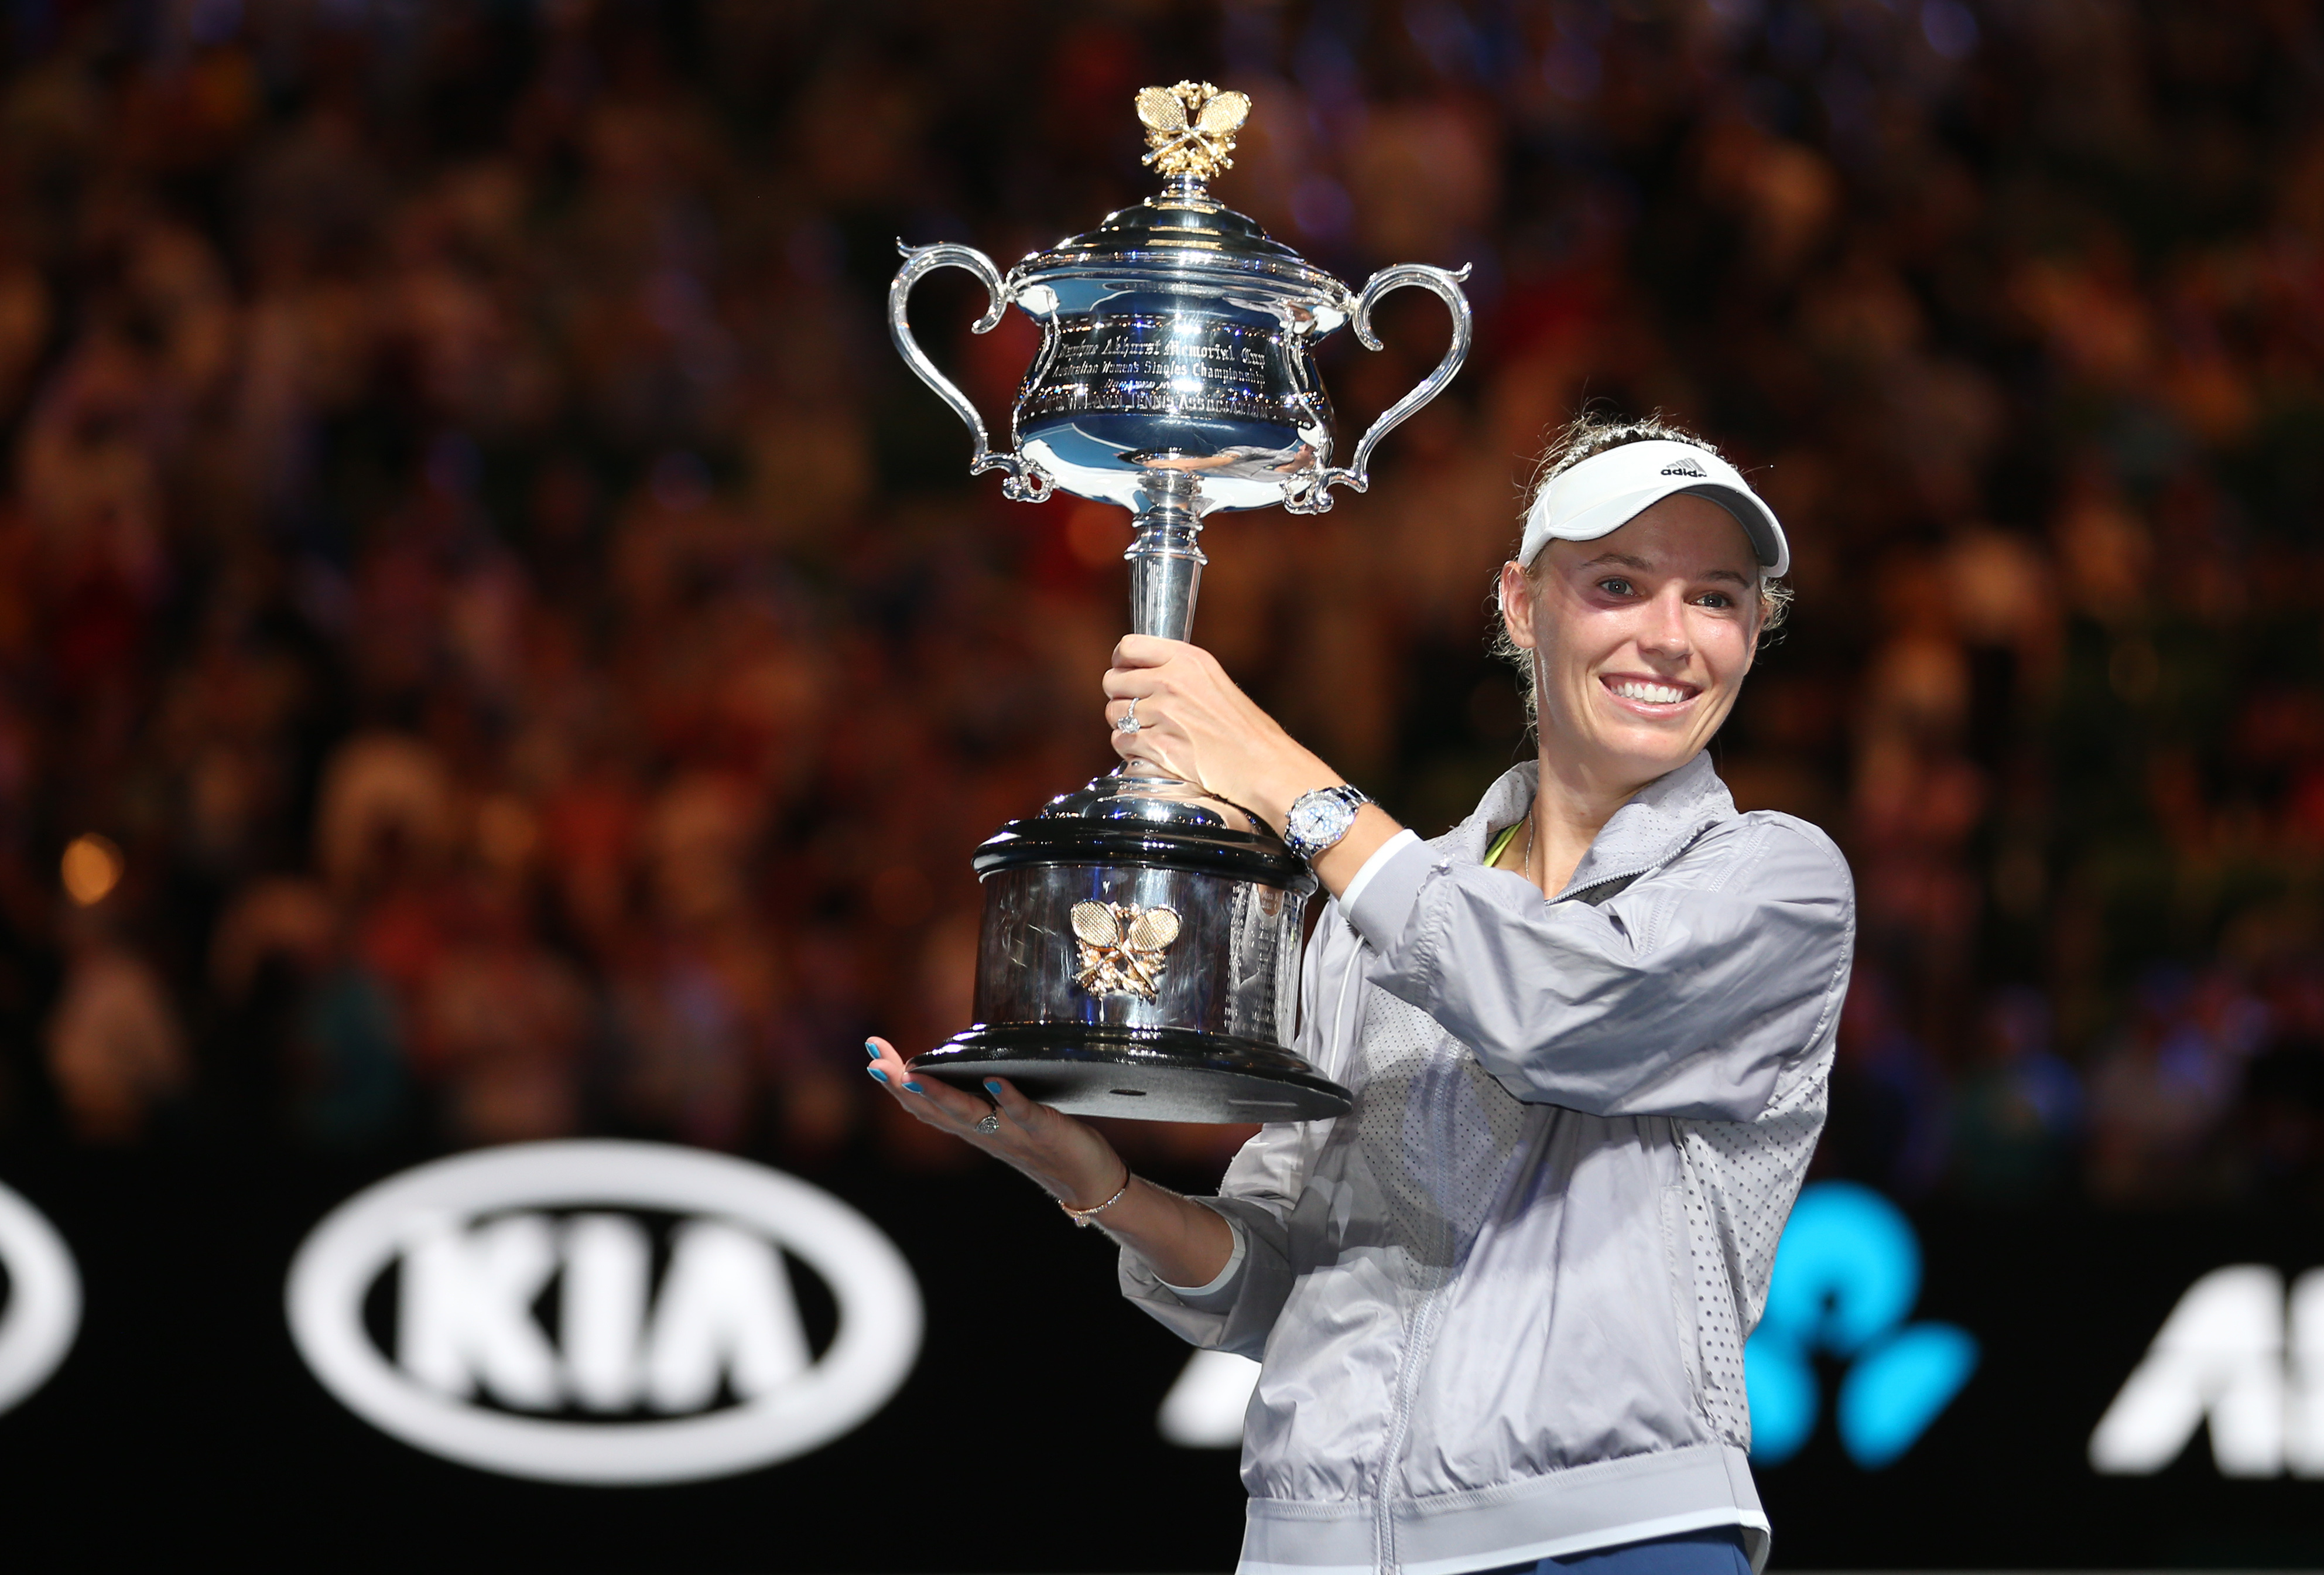 Caroline Wozniacki: more than just a tennis player. A look at the life of the champion NewsChain